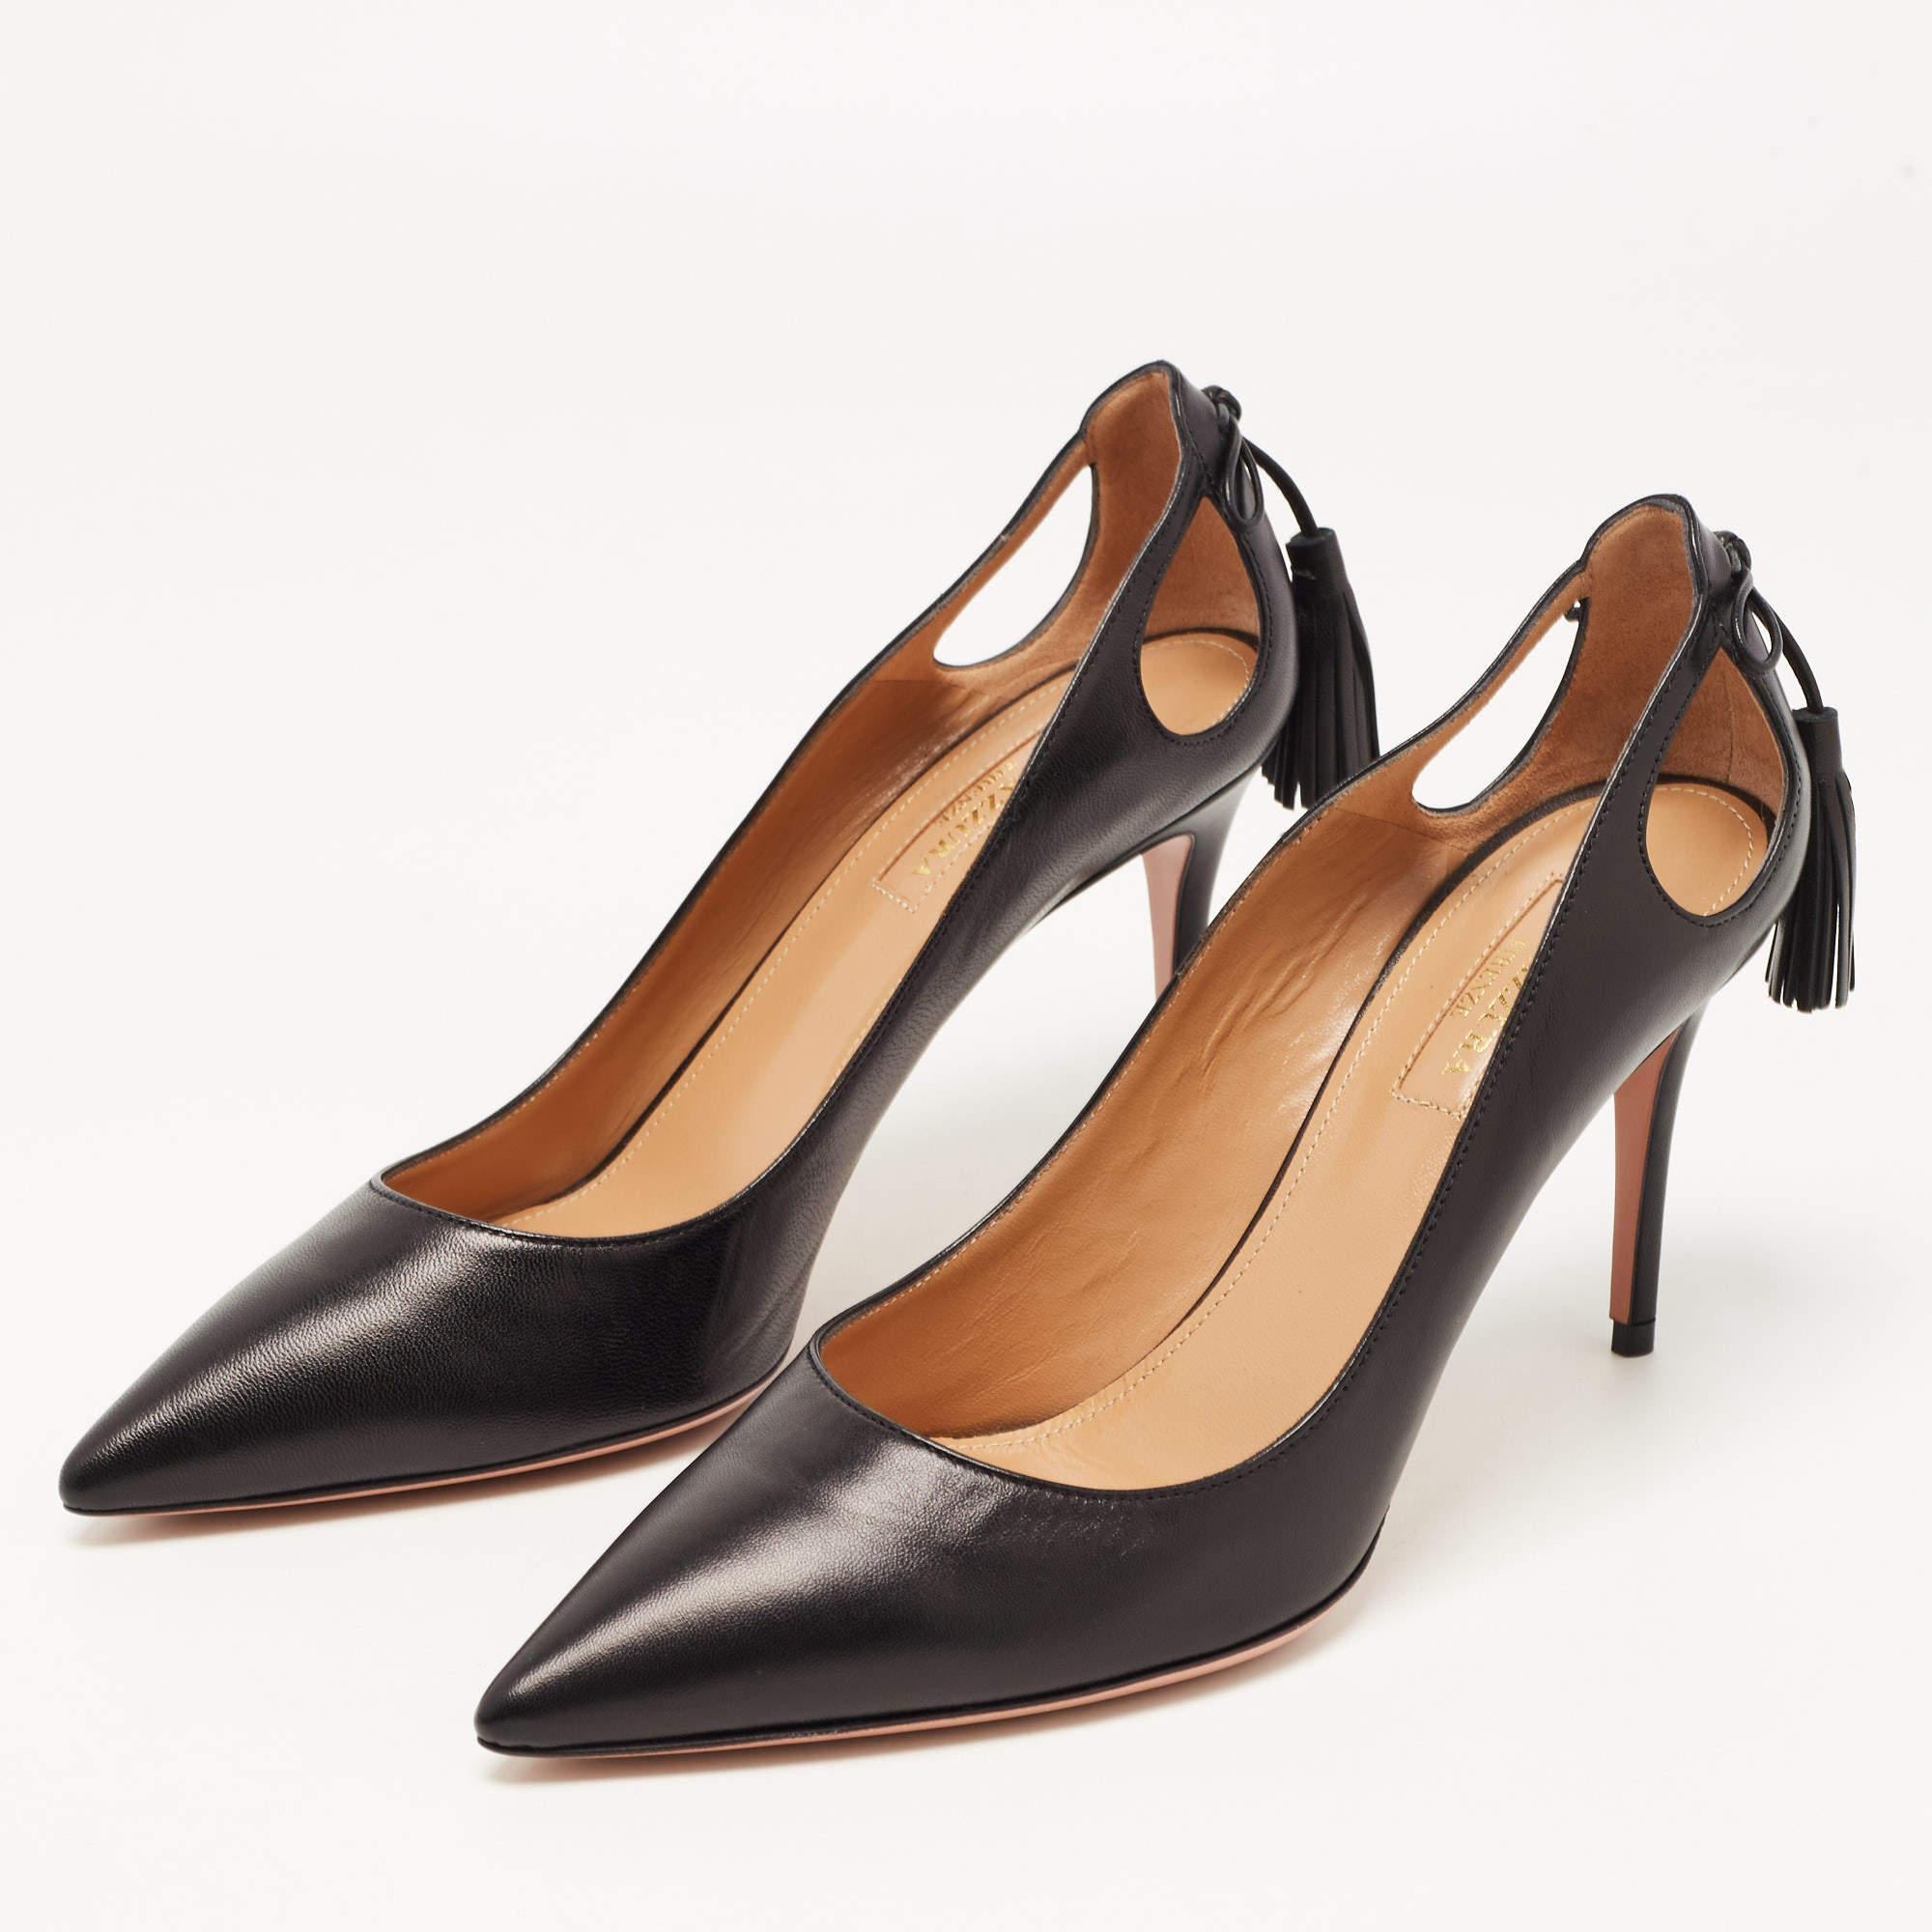 Exhibit an elegant style with this pair of Aquazzura pumps. These elegant shoes are crafted from quality materials. They are set on durable soles and sleek heels.

